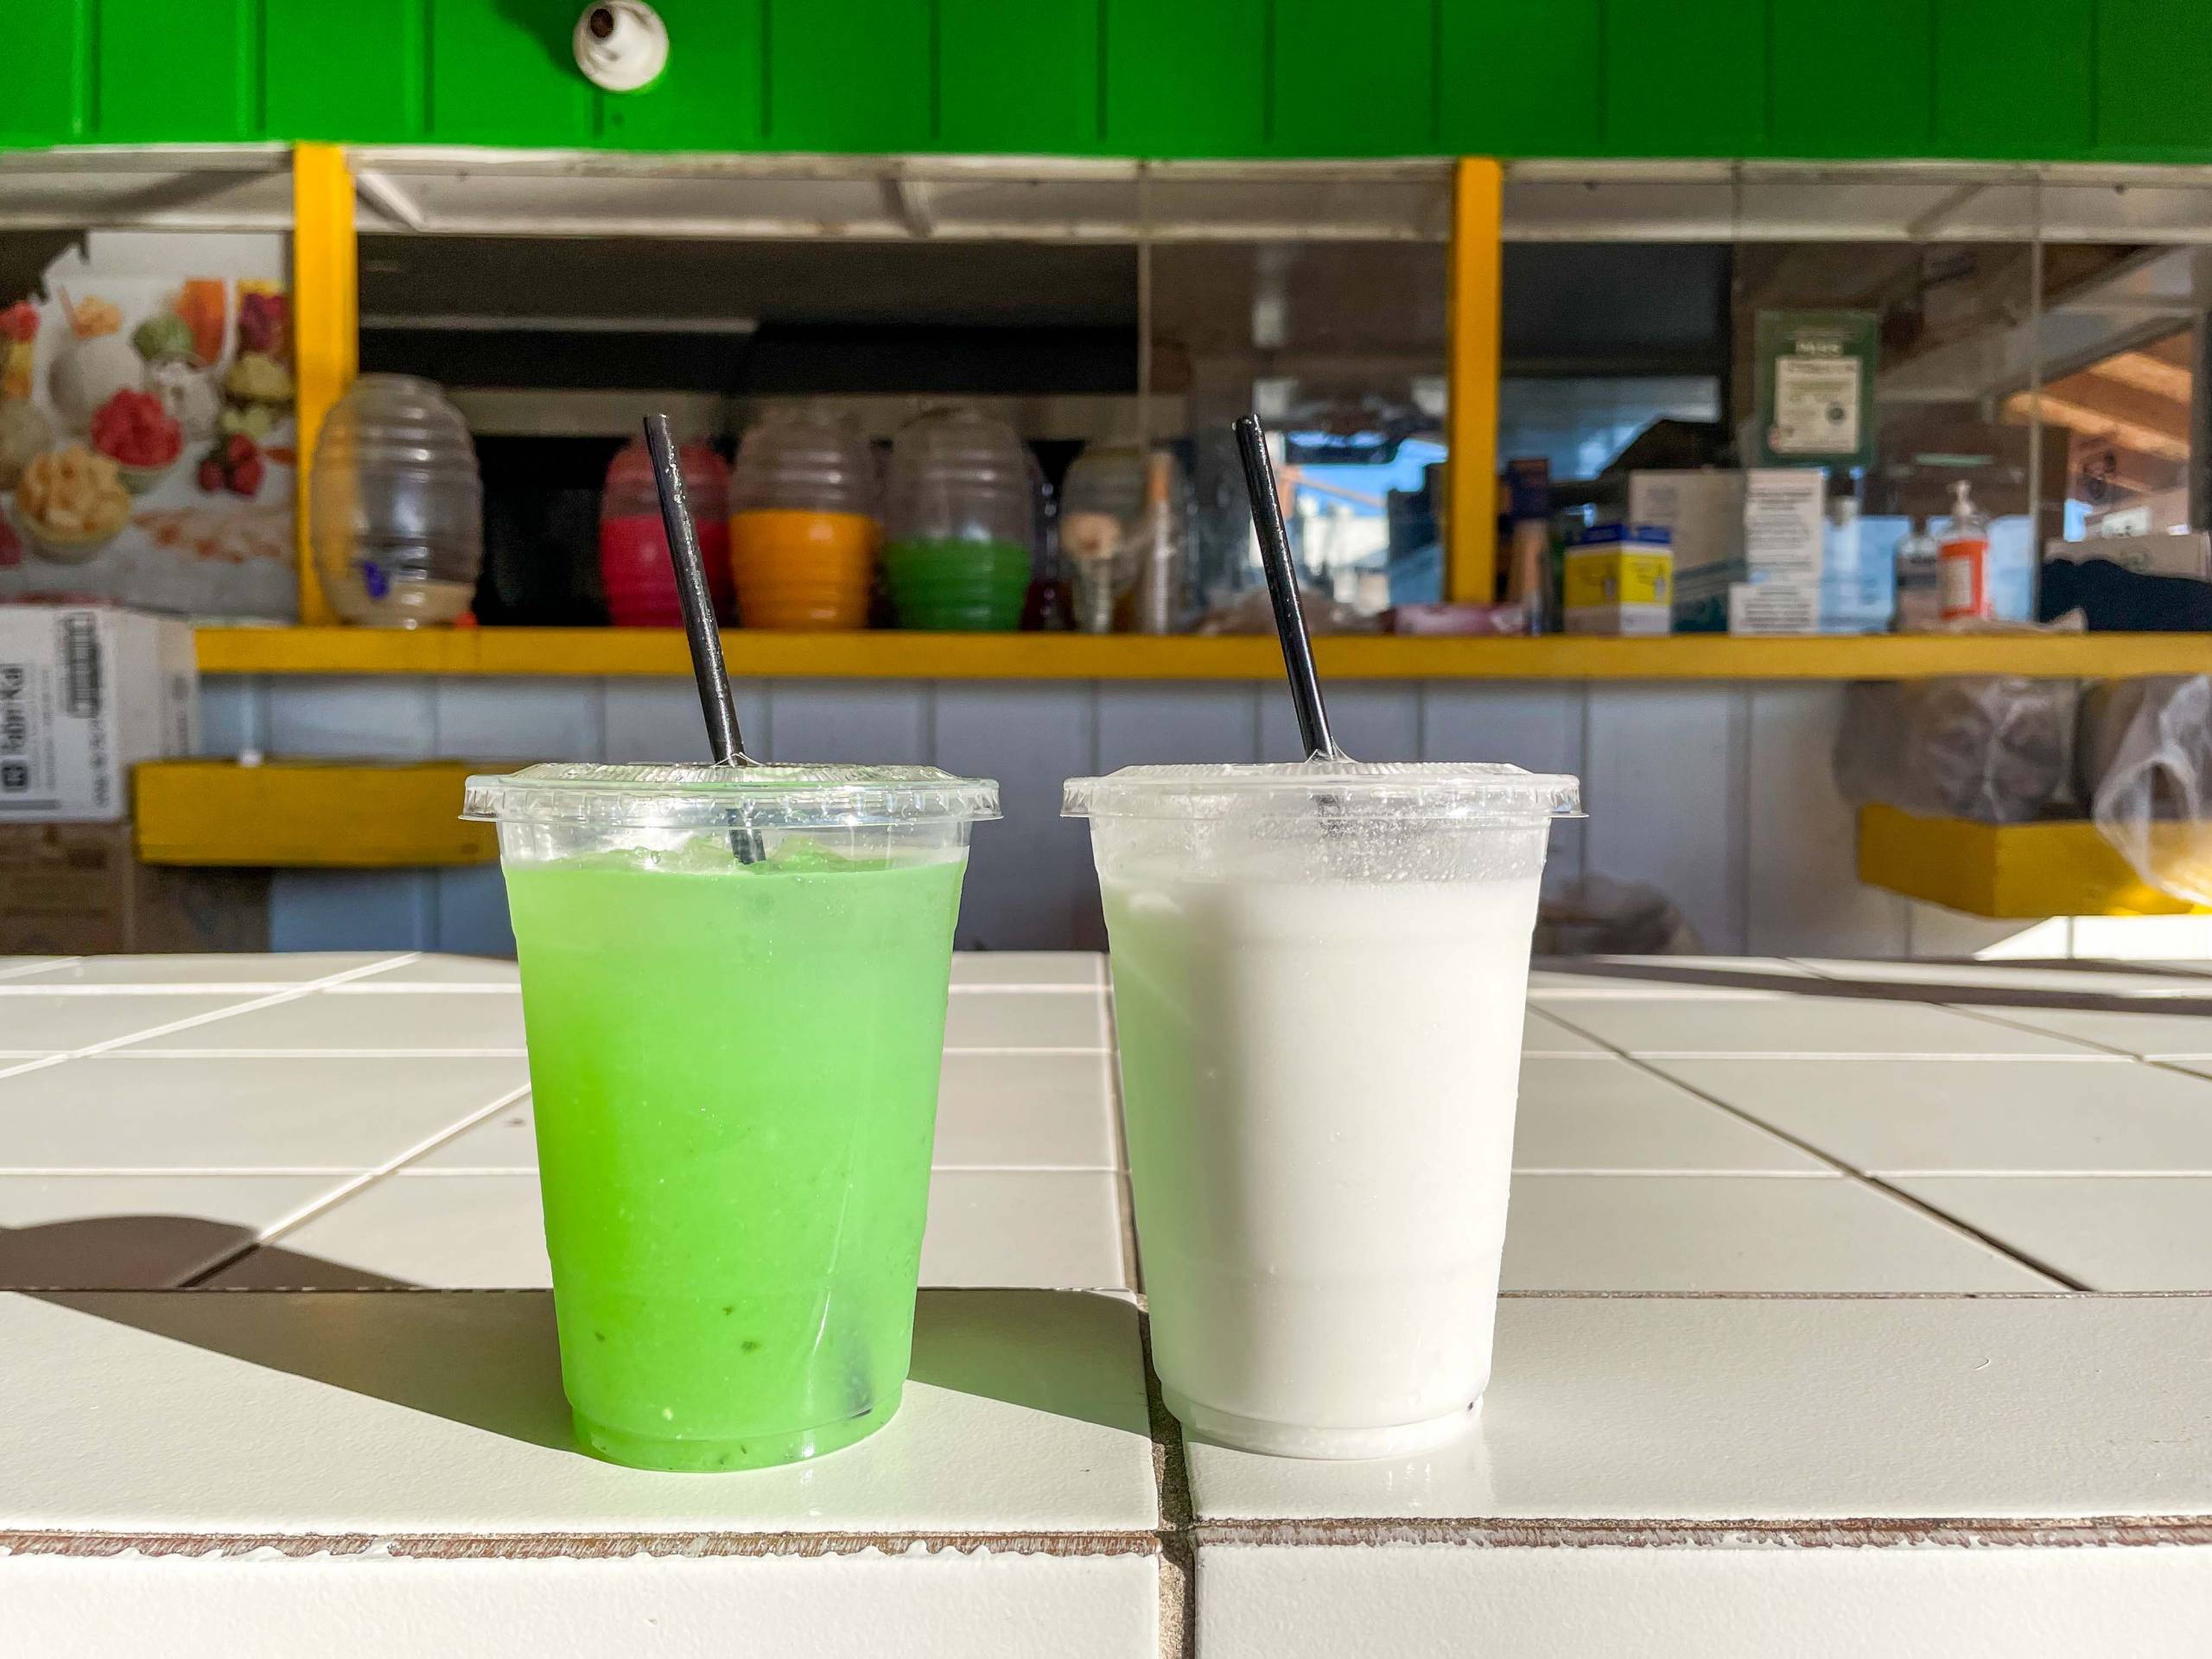 Two agua frescas, one green and one white, arranged on a table in front of a juice stand.